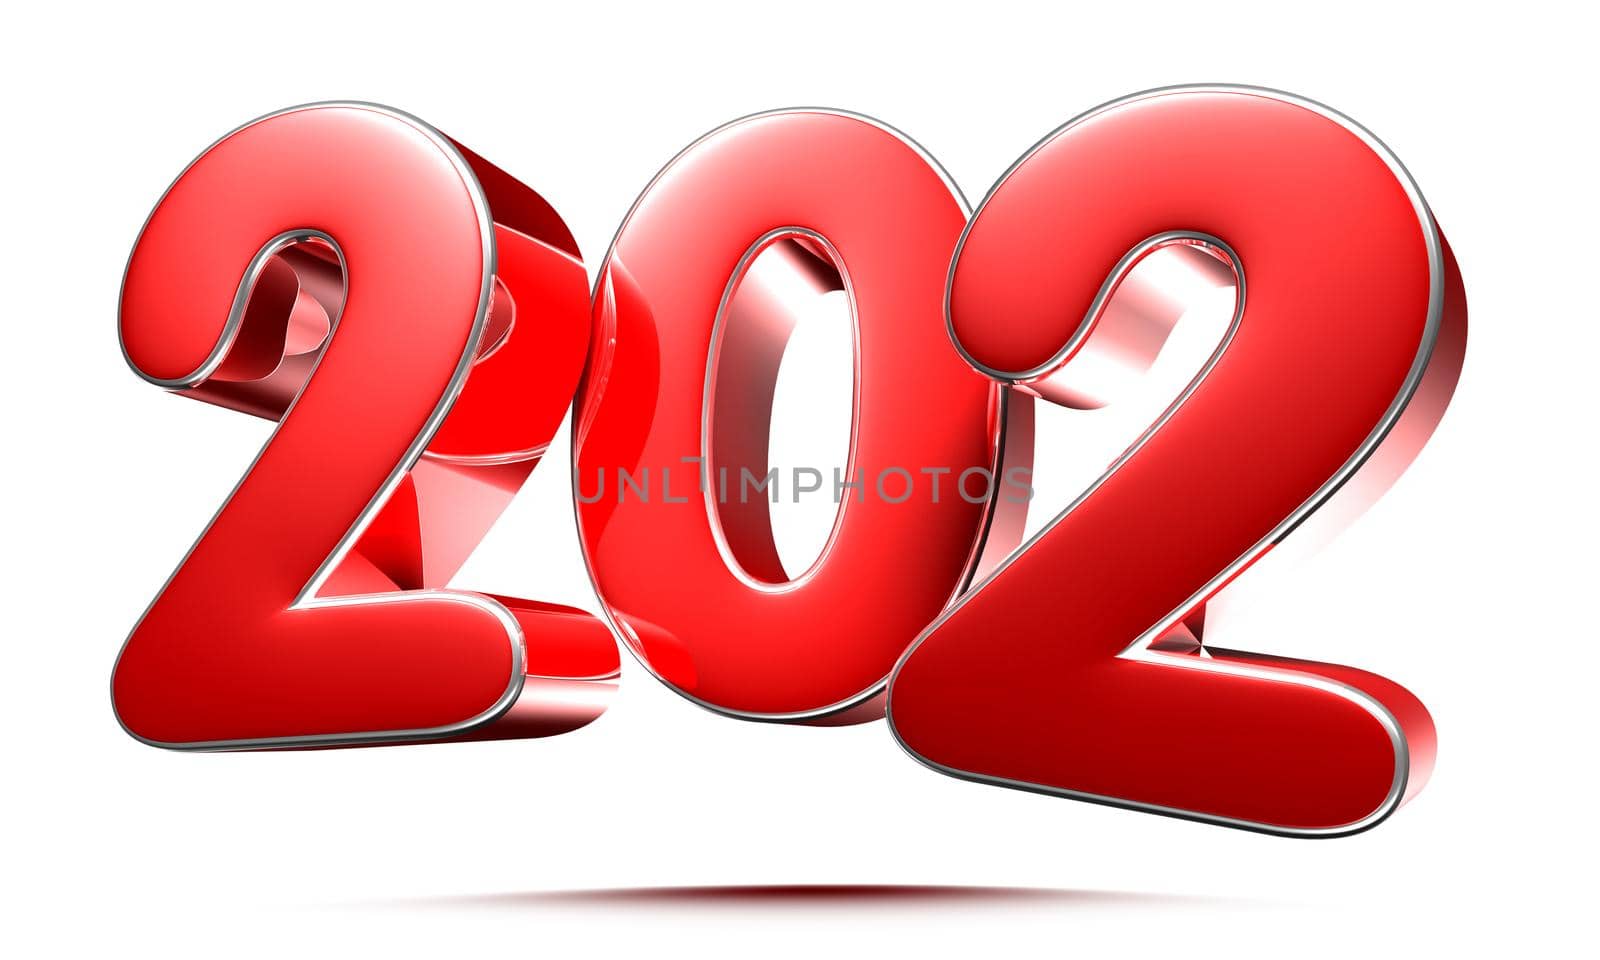 Rounded red numbers 202 on white background 3D illustration with clipping path by thitimontoyai